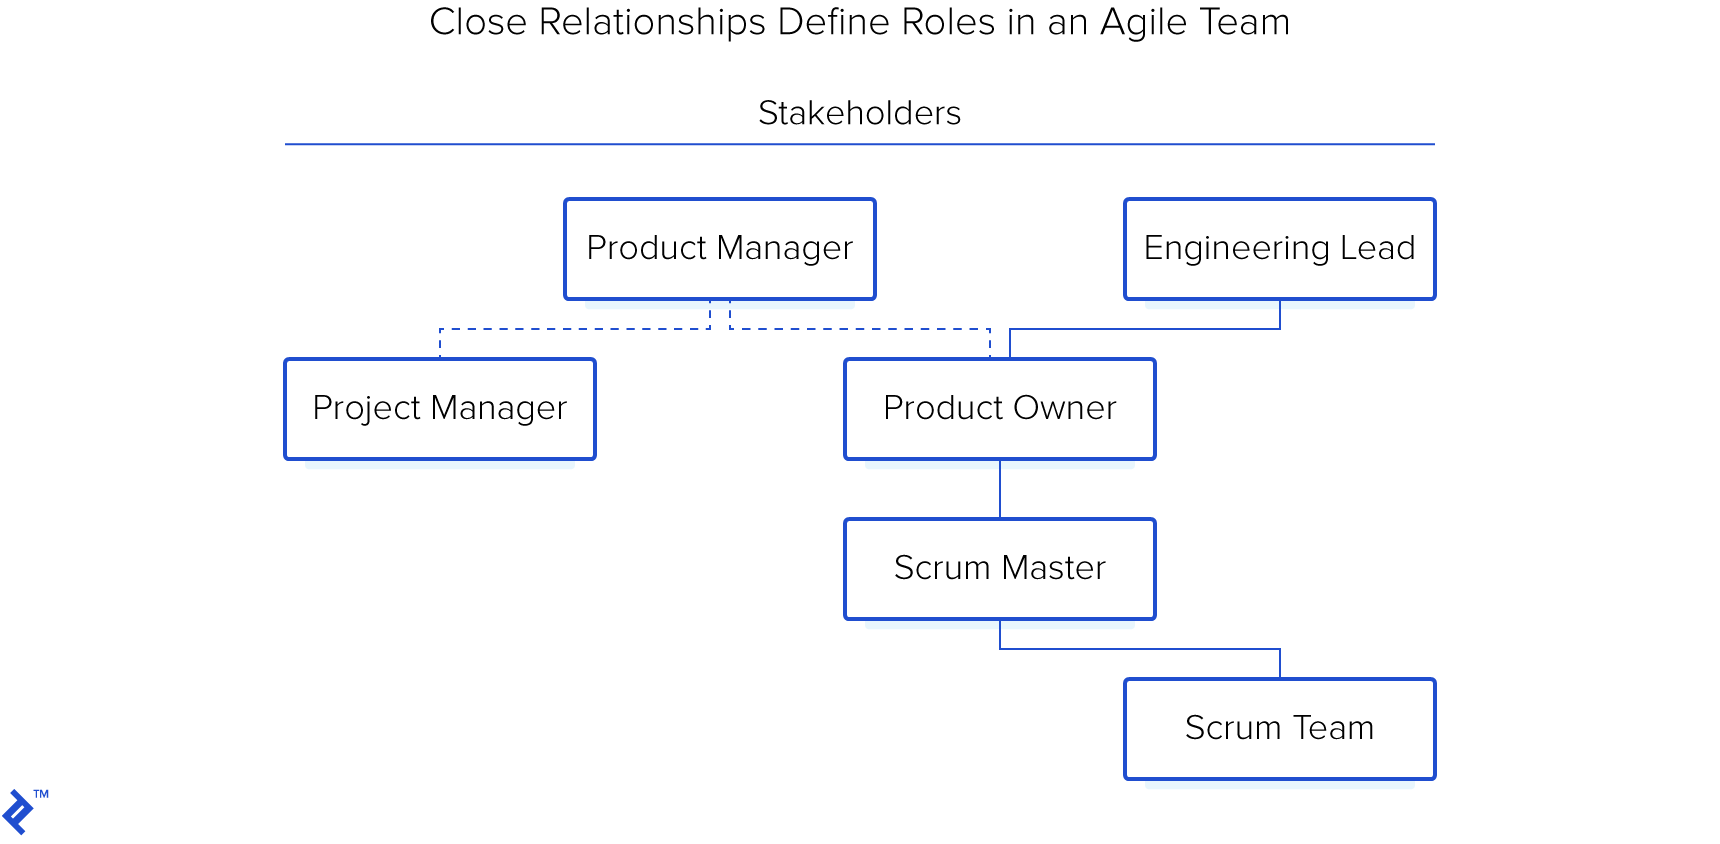 Close relationships define roles in an agile team.